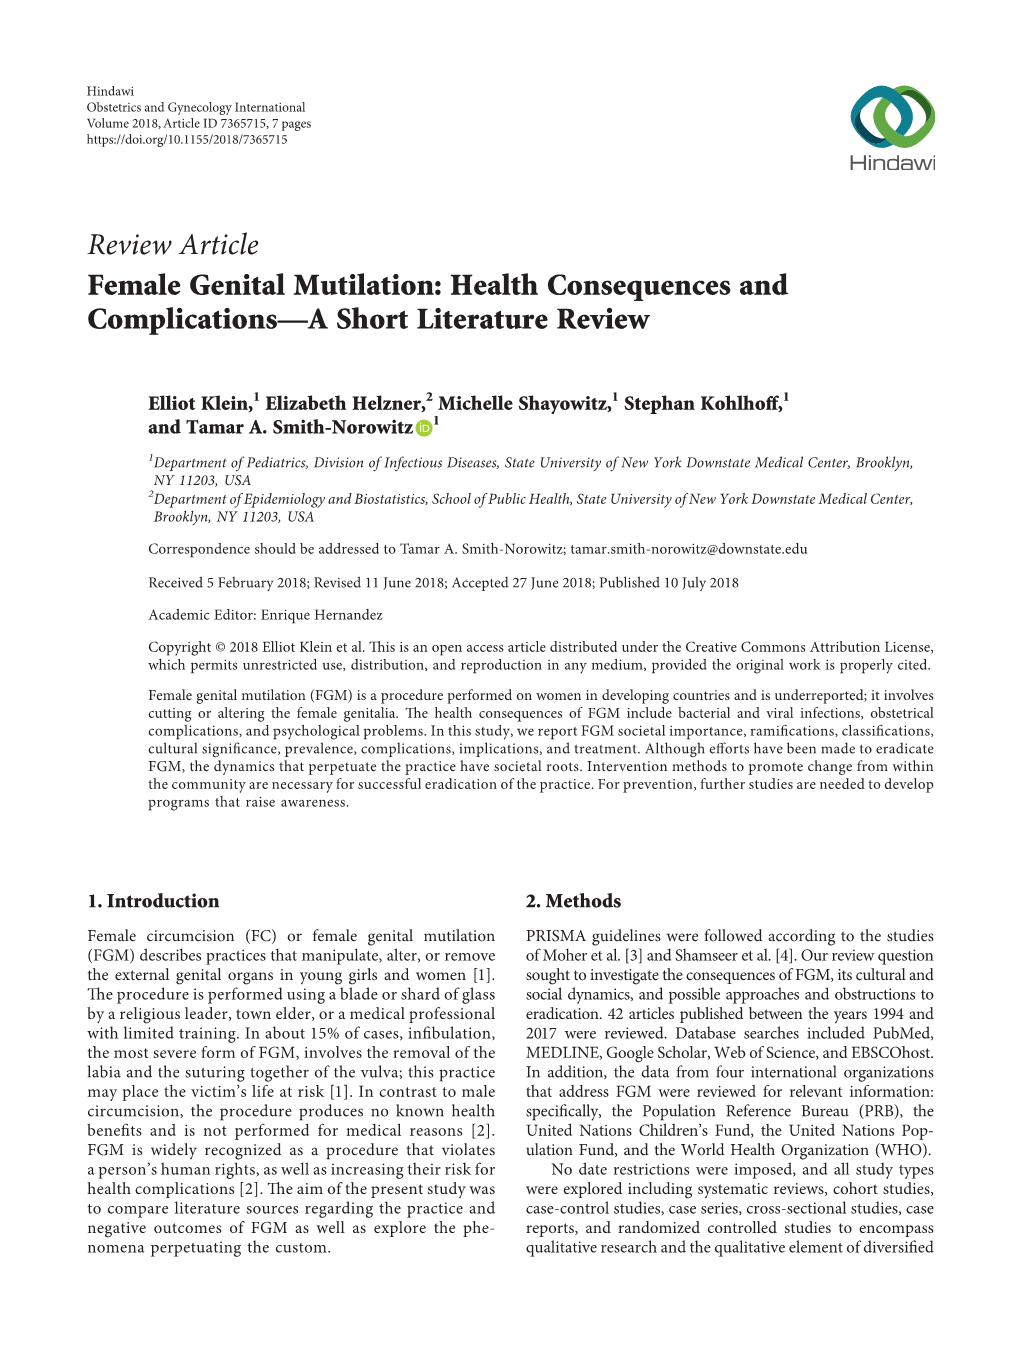 Review Article Female Genital Mutilation: Health Consequences and Complications—A Short Literature Review